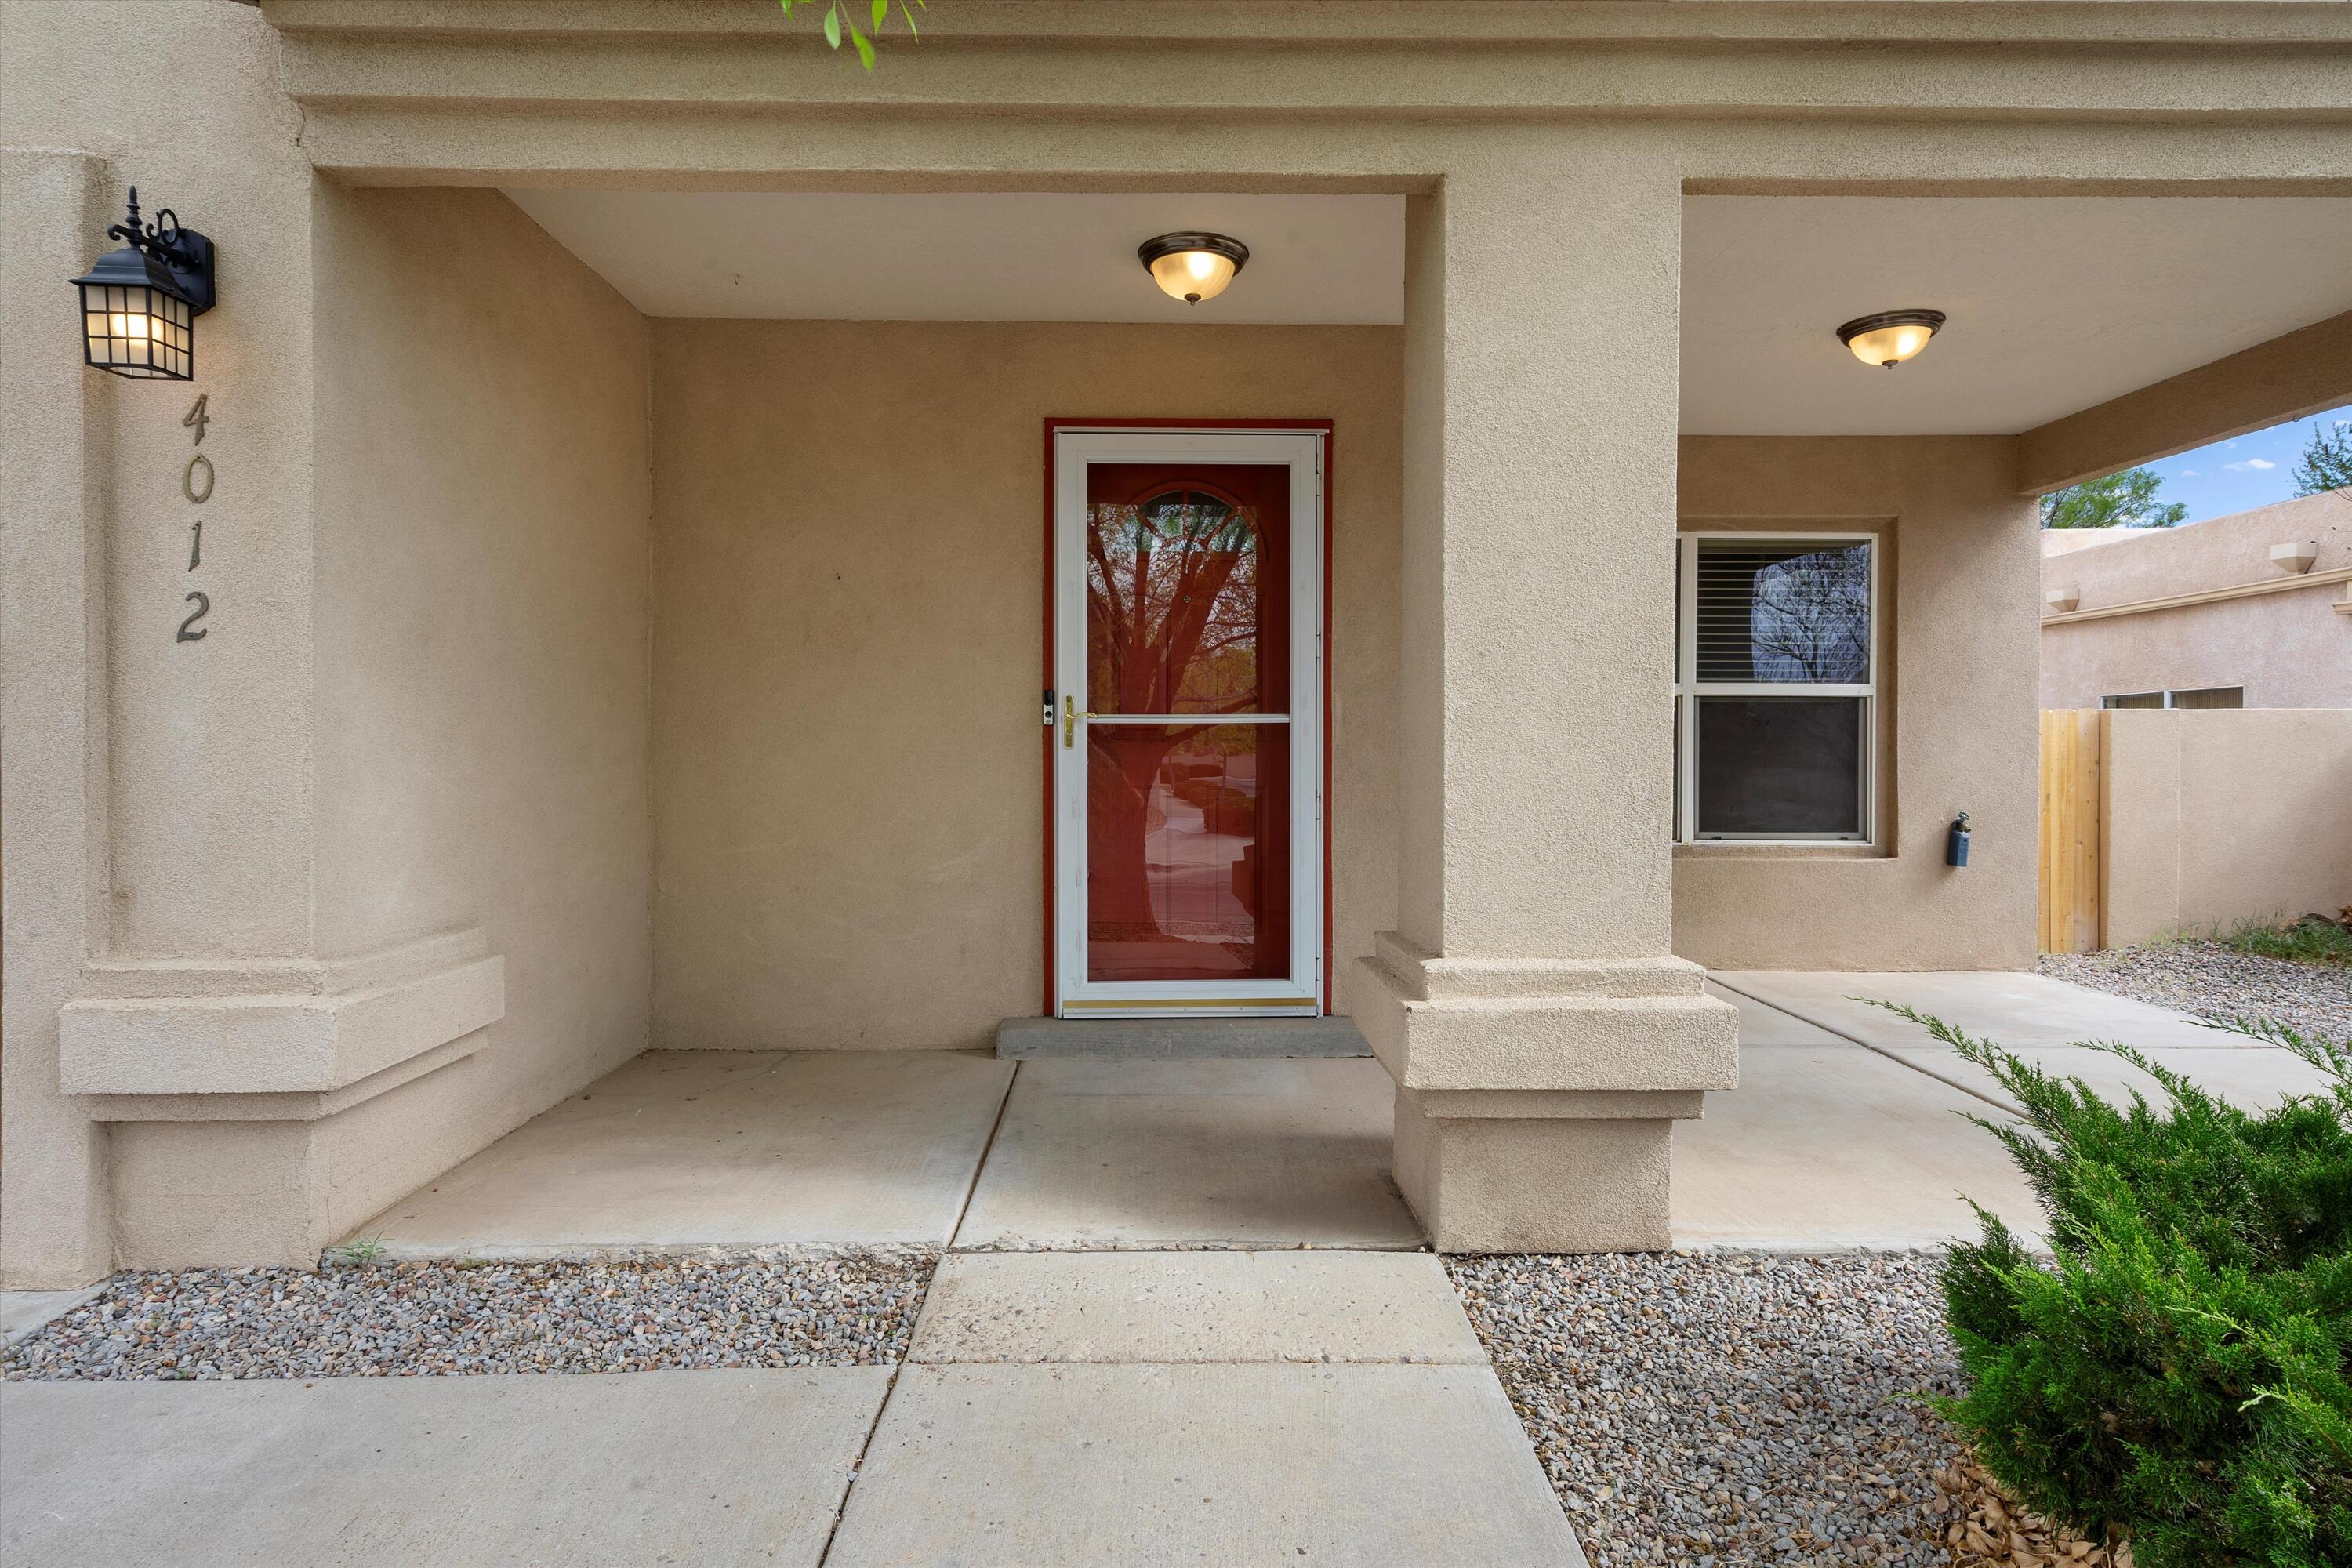 4012 Pasaje Place NW, Albuquerque, New Mexico 87114, 4 Bedrooms Bedrooms, ,3 BathroomsBathrooms,Residential,For Sale,4012 Pasaje Place NW,1061249